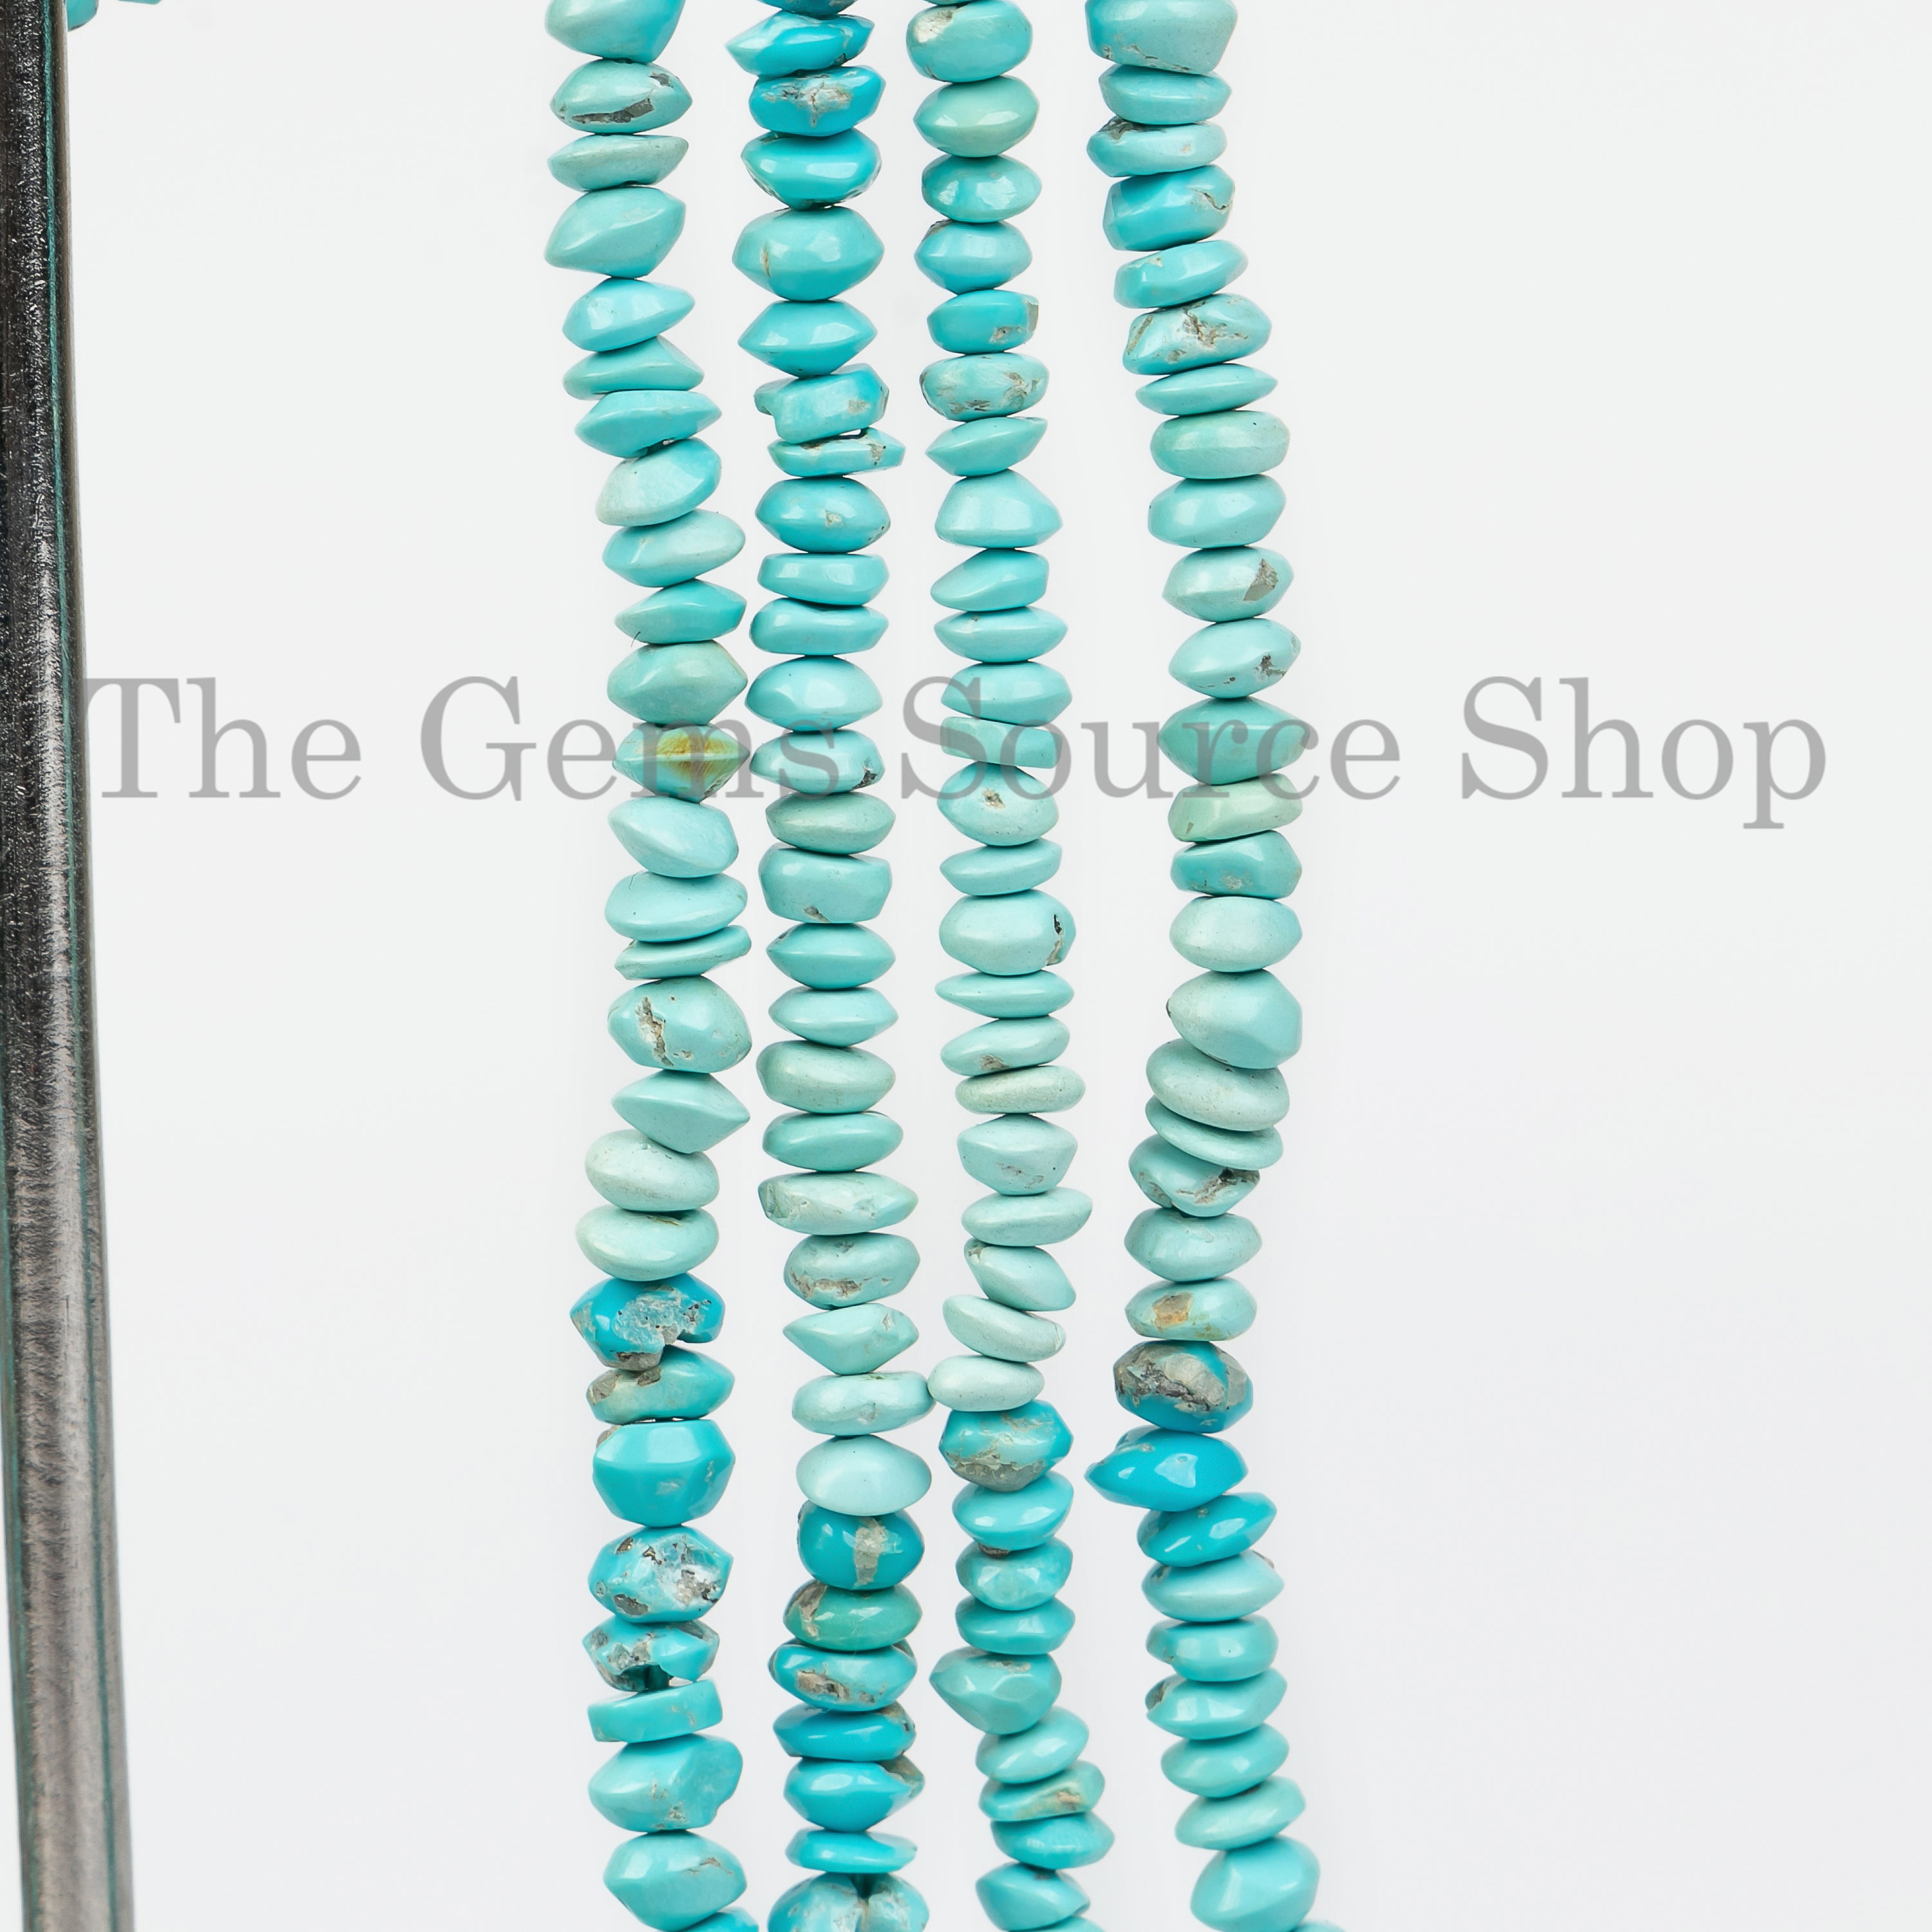 Natural Turquoise Beads, Turquoise Smooth Beads, Turquoise Button Shape Beads, Wholesale Beads